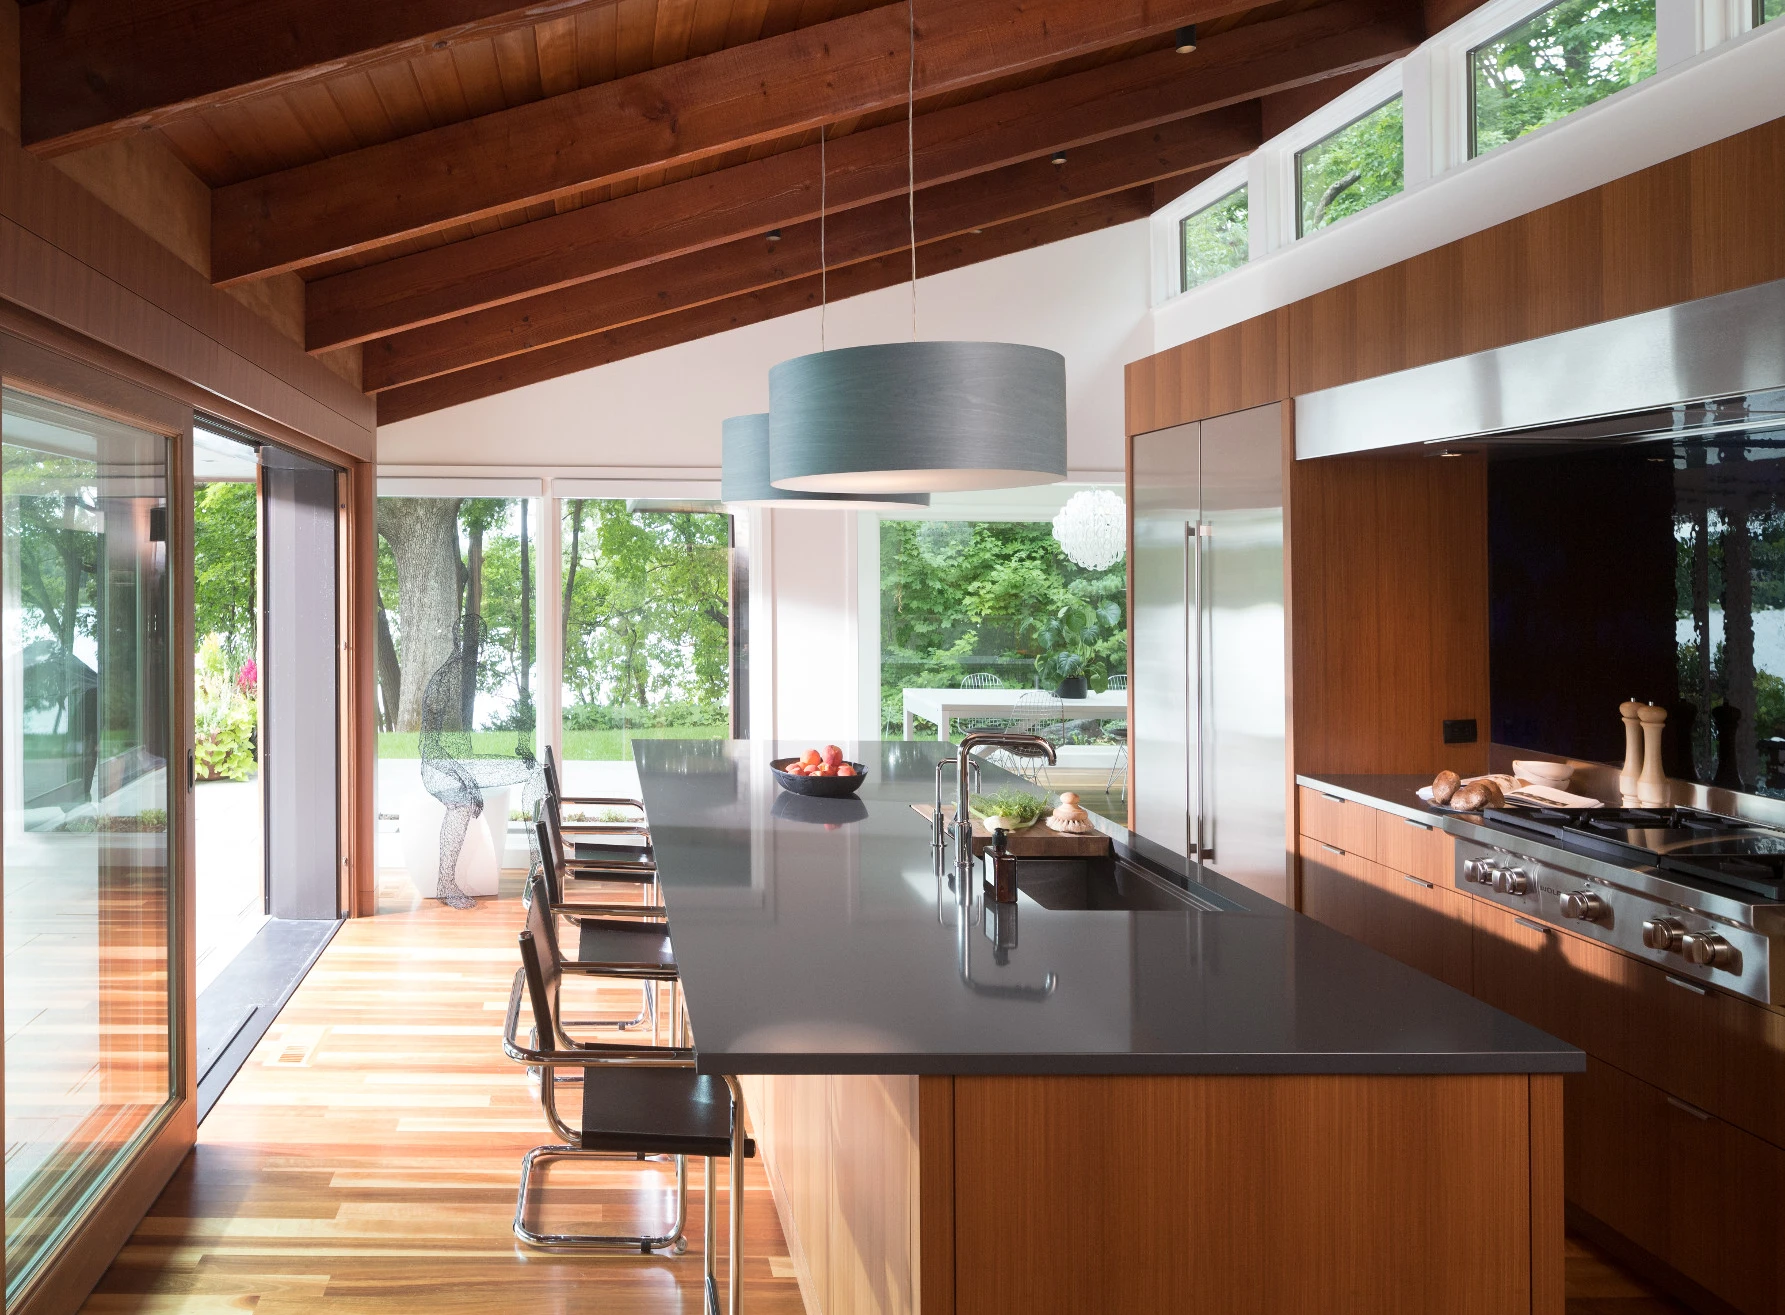 a mid-century modern kitchen by Petersen/Keller Architecture with wooden cabinets, a wooden vaulted ceiling, lots of windows with natural lighting, and a large kitchen island topped with Cambria Fieldstone gray quartz countertops.